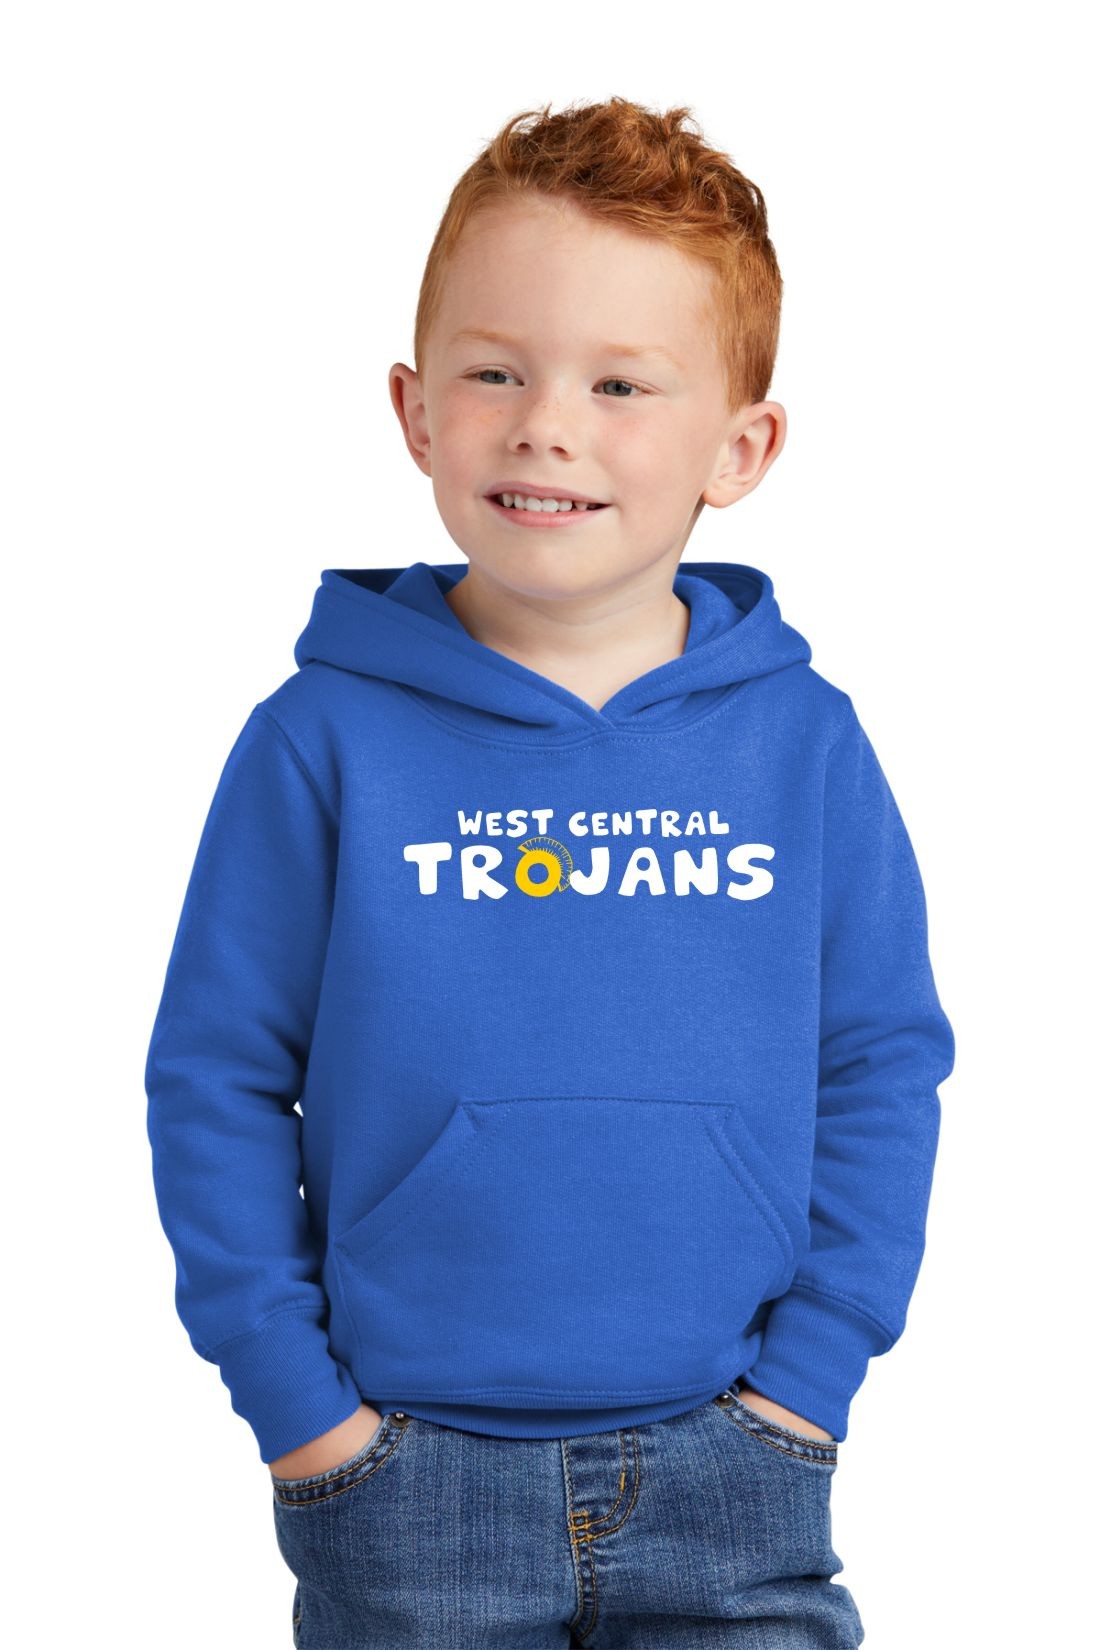 Toddler West Central Trojans Hoodie - Royal